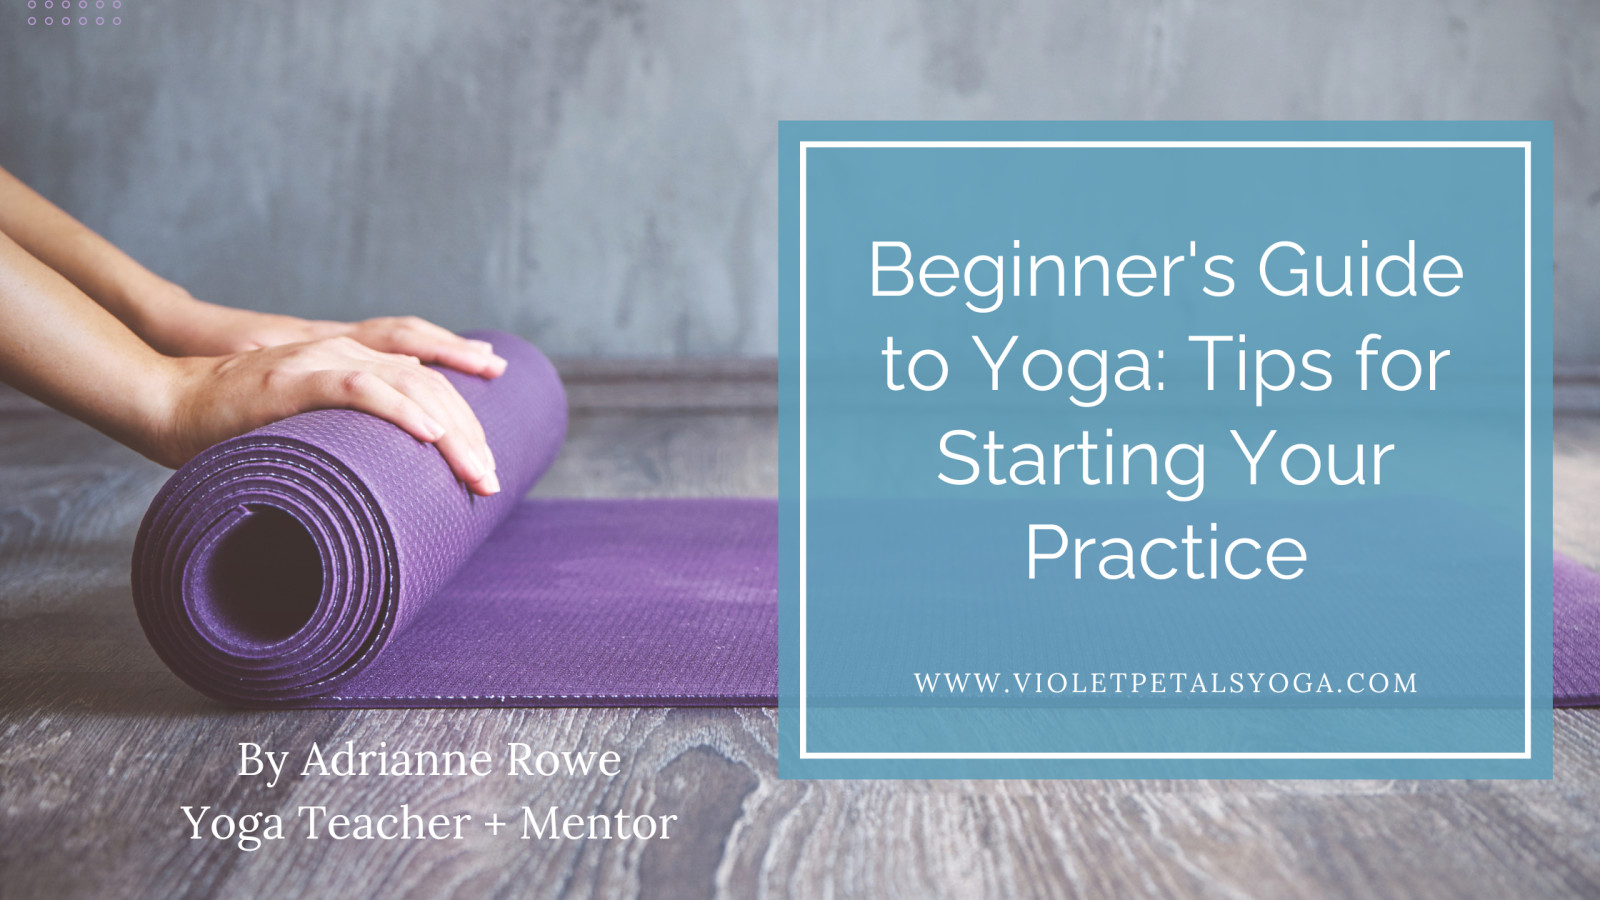 Beginner's Guide to Yoga: Tips for Starting Your Practice